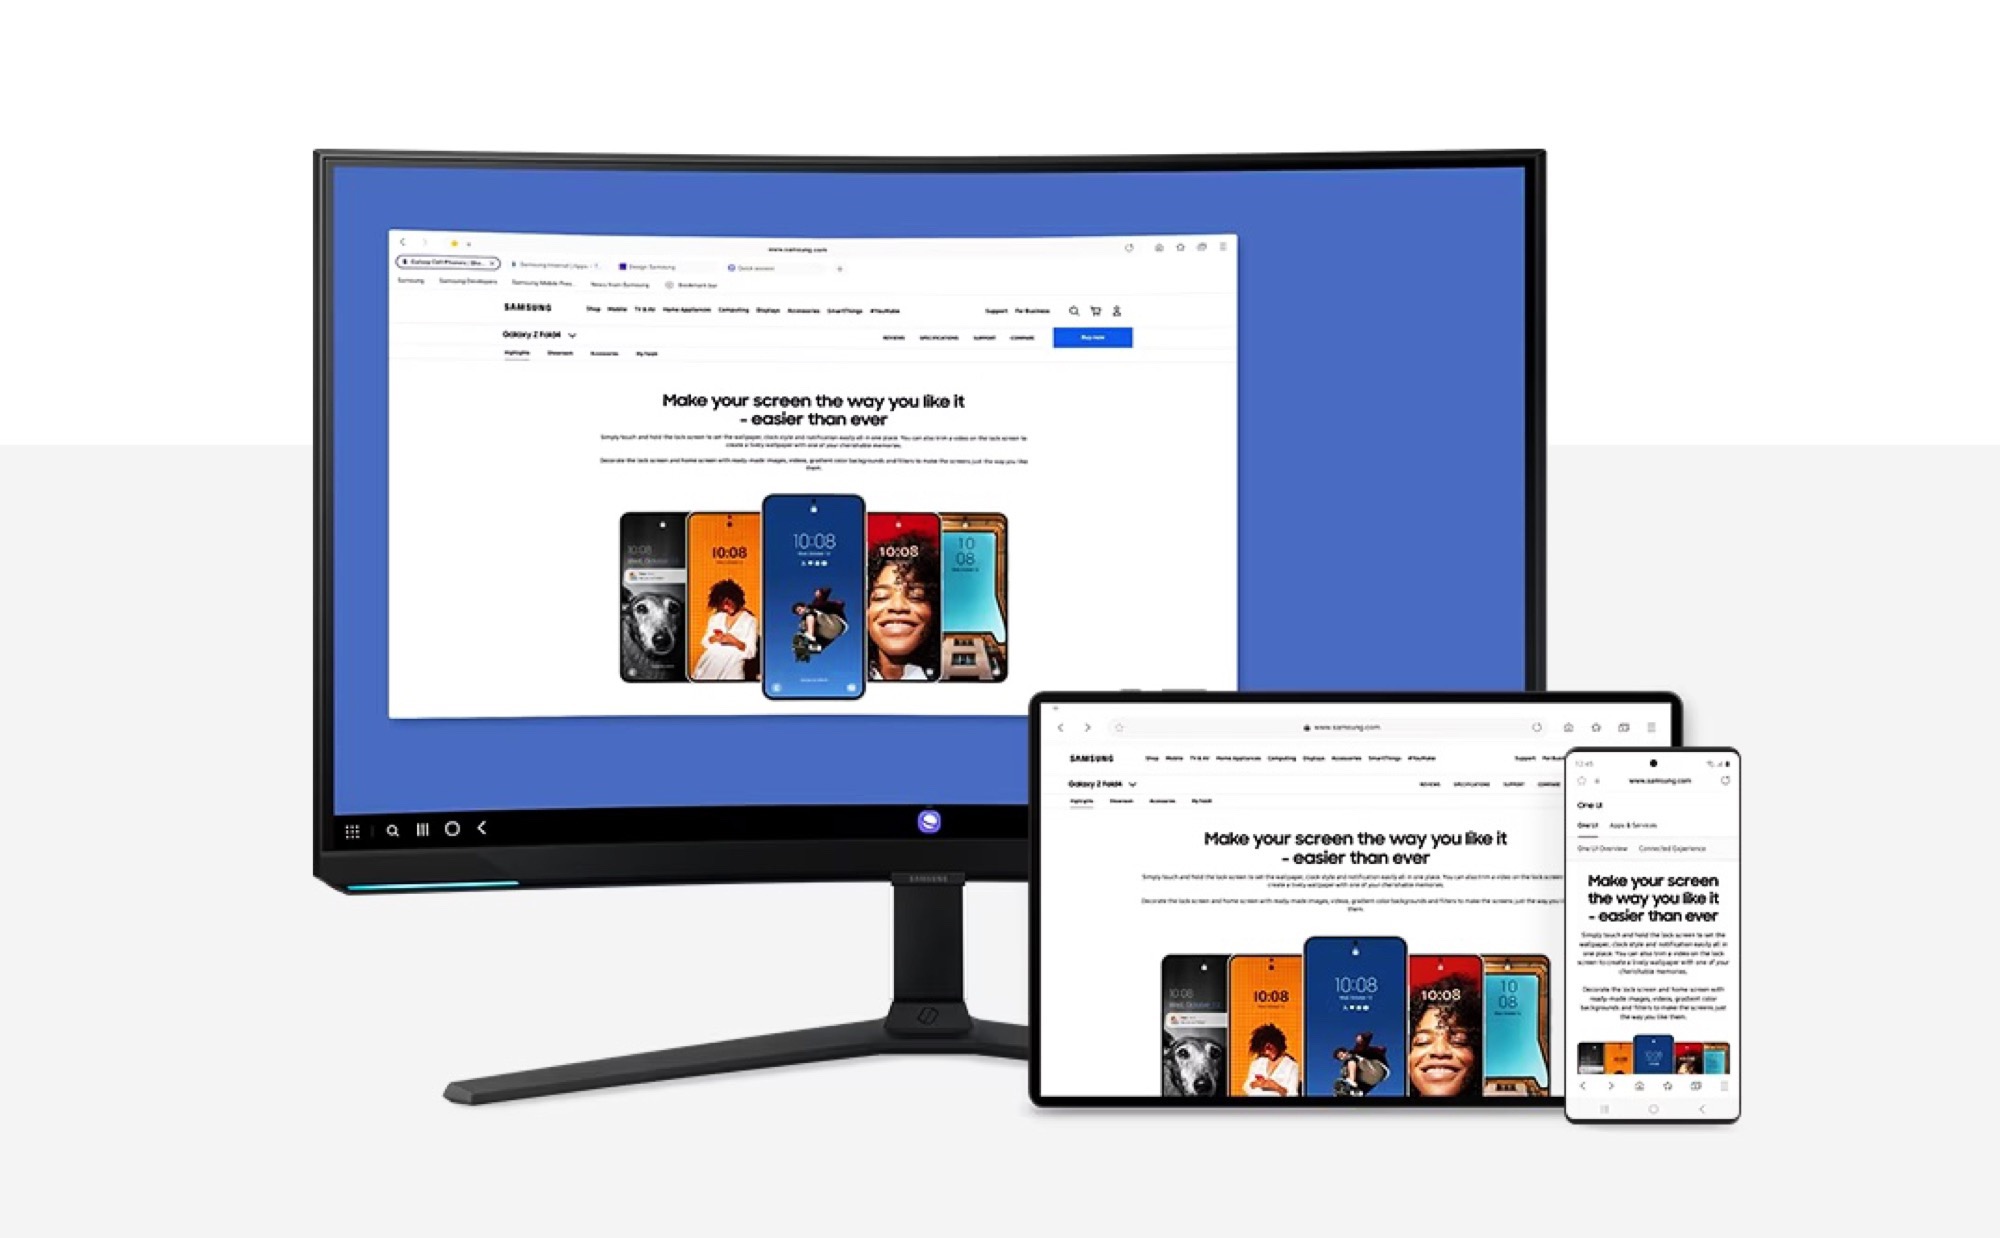 Samsung releases web browser for Windows - NotebookCheck.net News